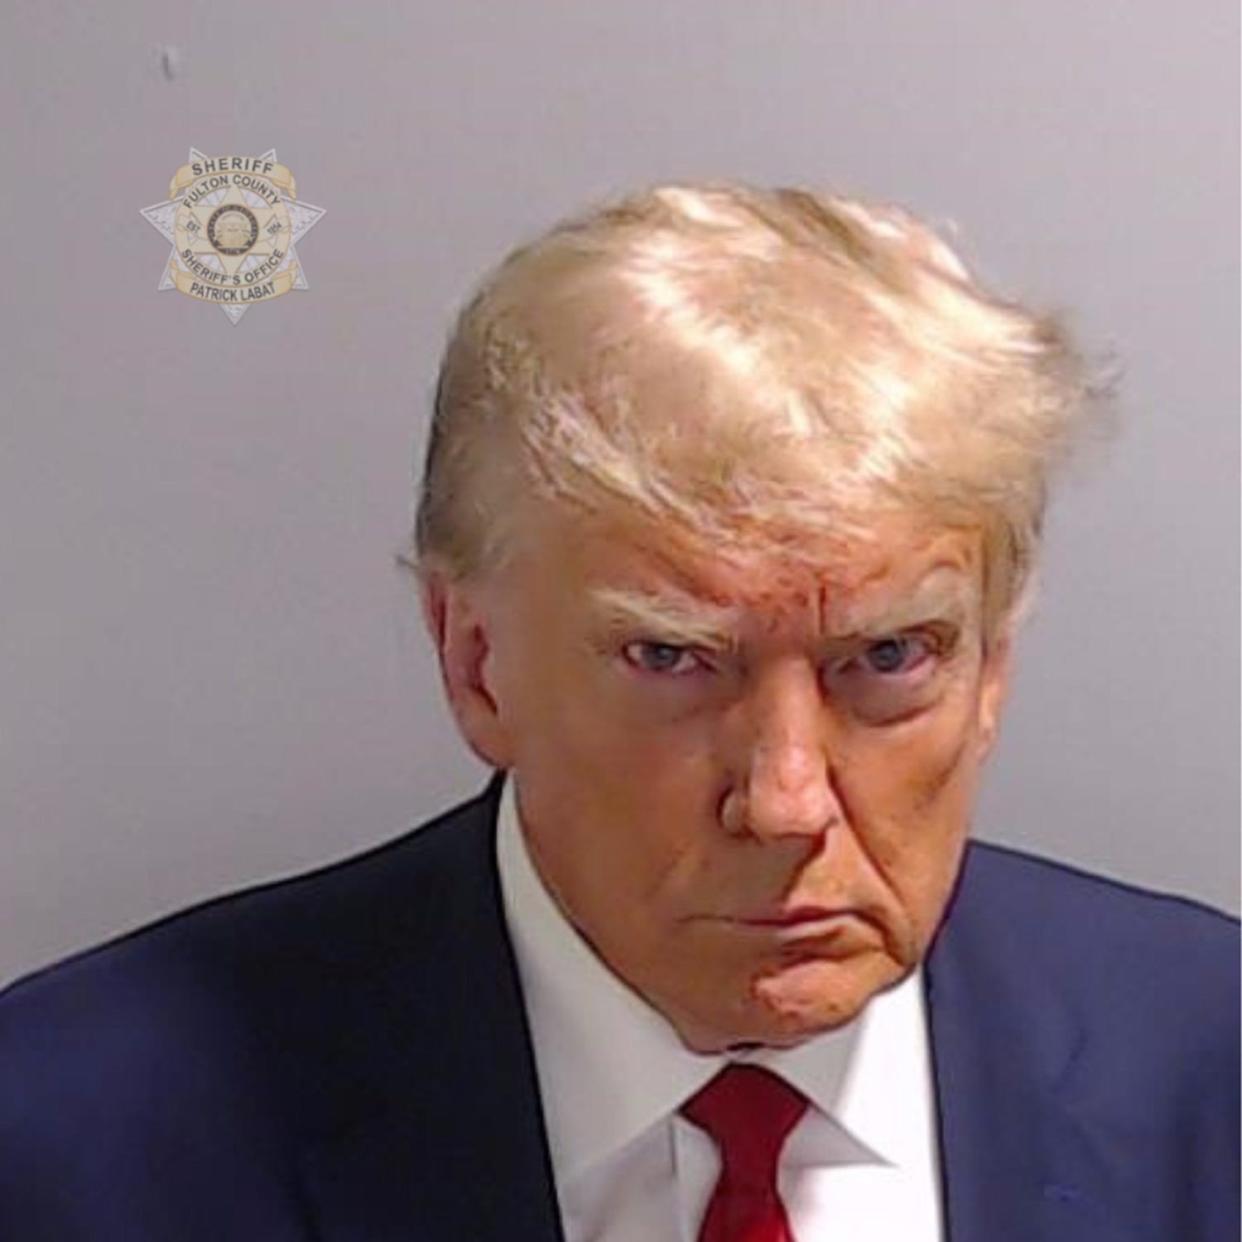 In this handout provided by the Fulton County Sheriff's Office, former U.S. President Donald Trump poses for his booking photo at the Fulton County Jail on August 24, 2023 in Atlanta, Georgia. Trump was booked on 13 charges related to an alleged plan to overturn the results of the 2020 presidential election in Georgia. Trump and 18 others facing felony charges have been ordered to turn themselves in to the Fulton County Jail by Aug. 25.